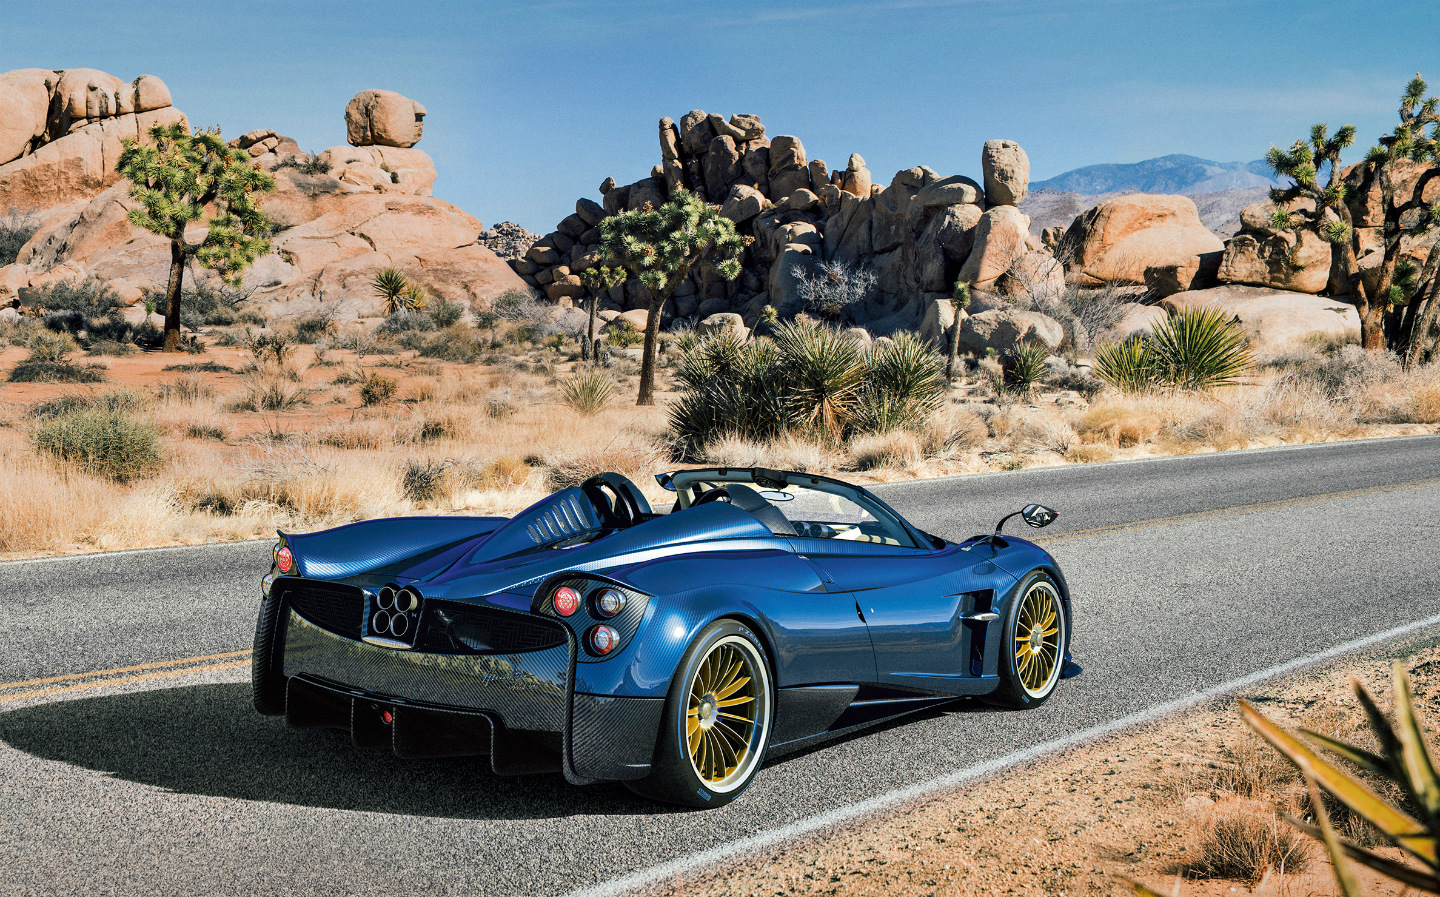 Gone with the wind: £2.3m Pagani Roadster sold out before Geneva motor show debut